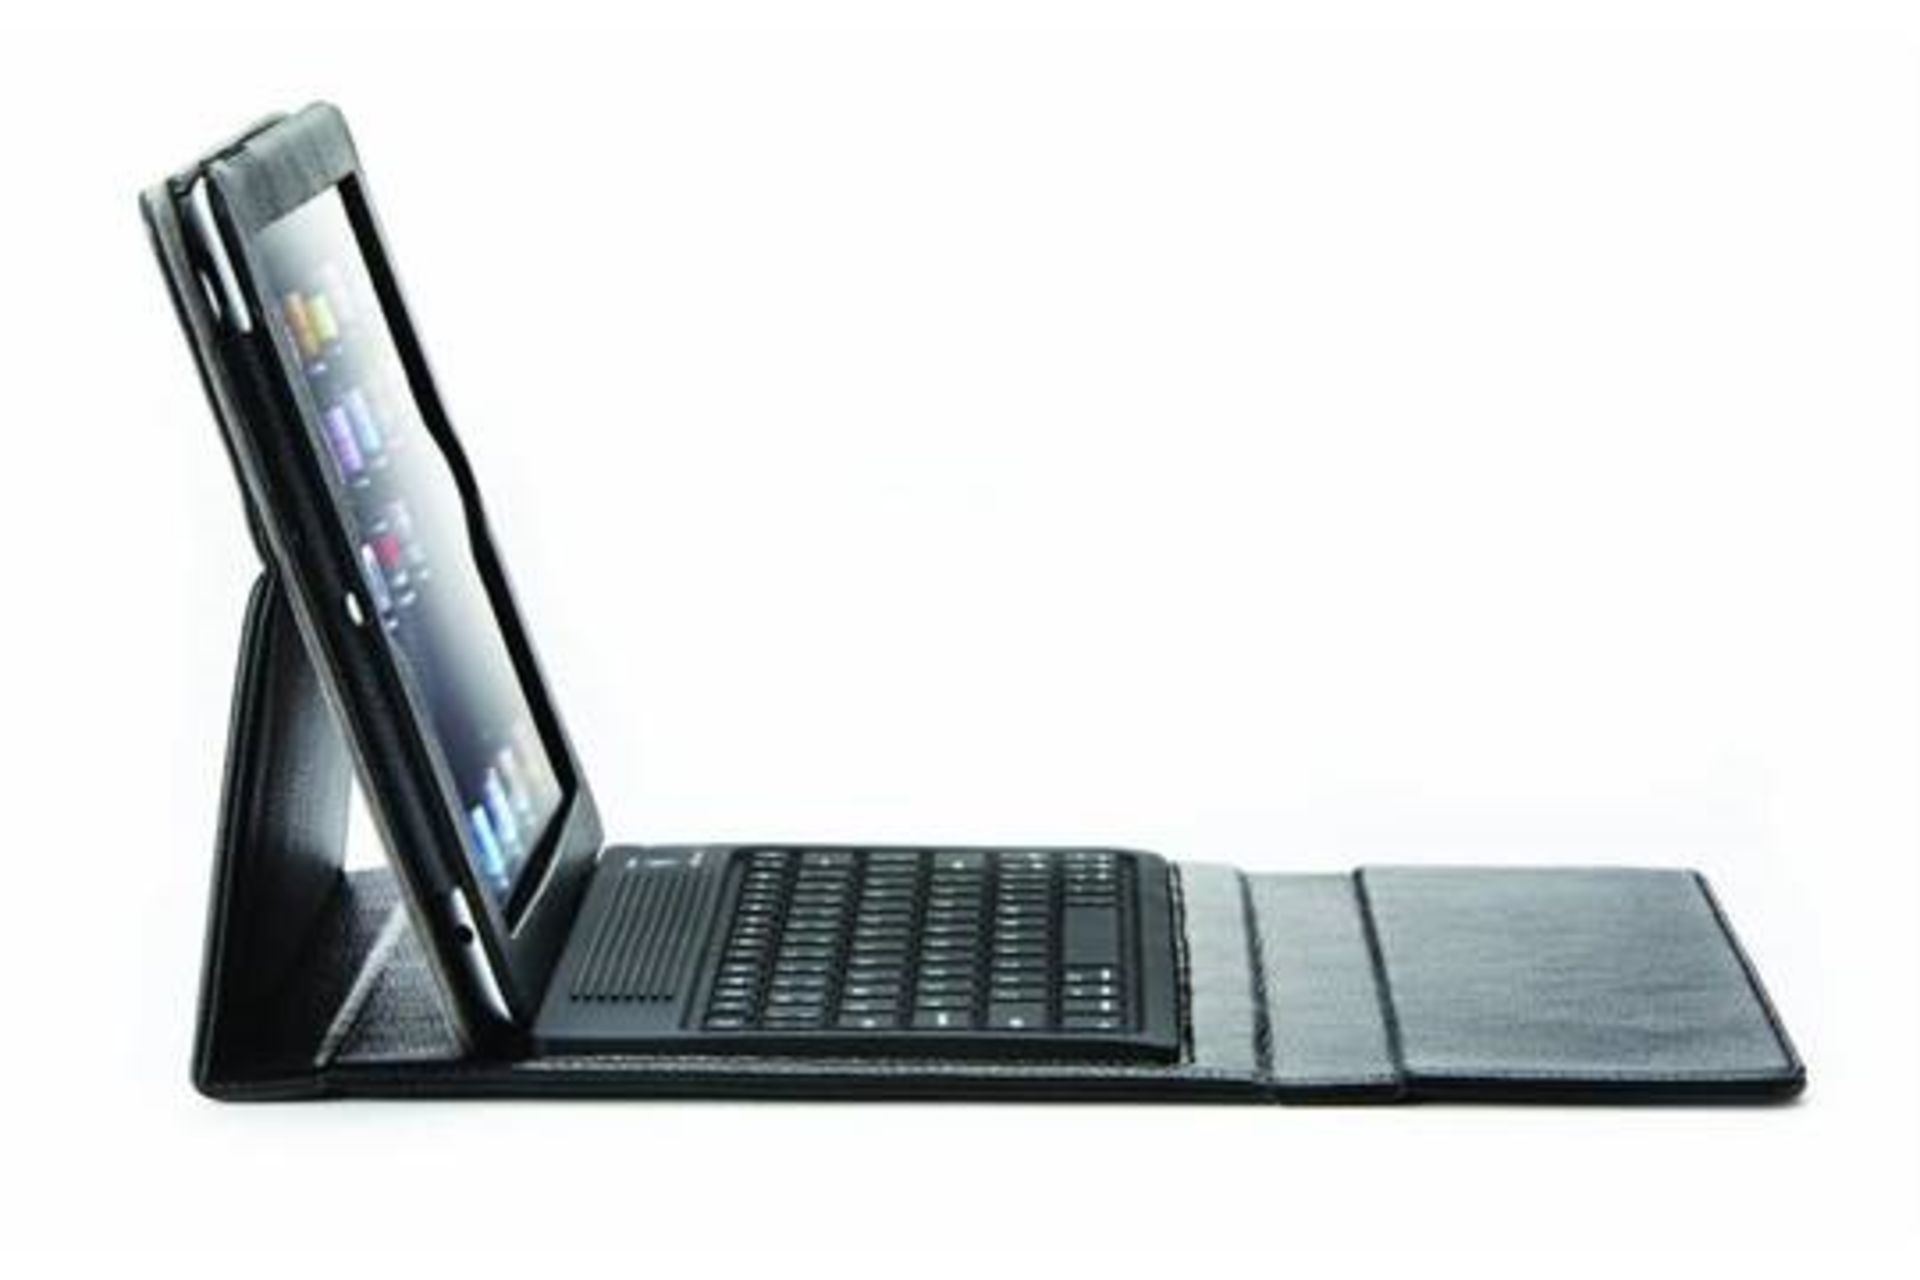 1 x Mi Leather IPAD CASE With Integrated Bluetooth 2.0 Keyboard - Wireless Keyboard, Upto 90 Hours - Image 2 of 5